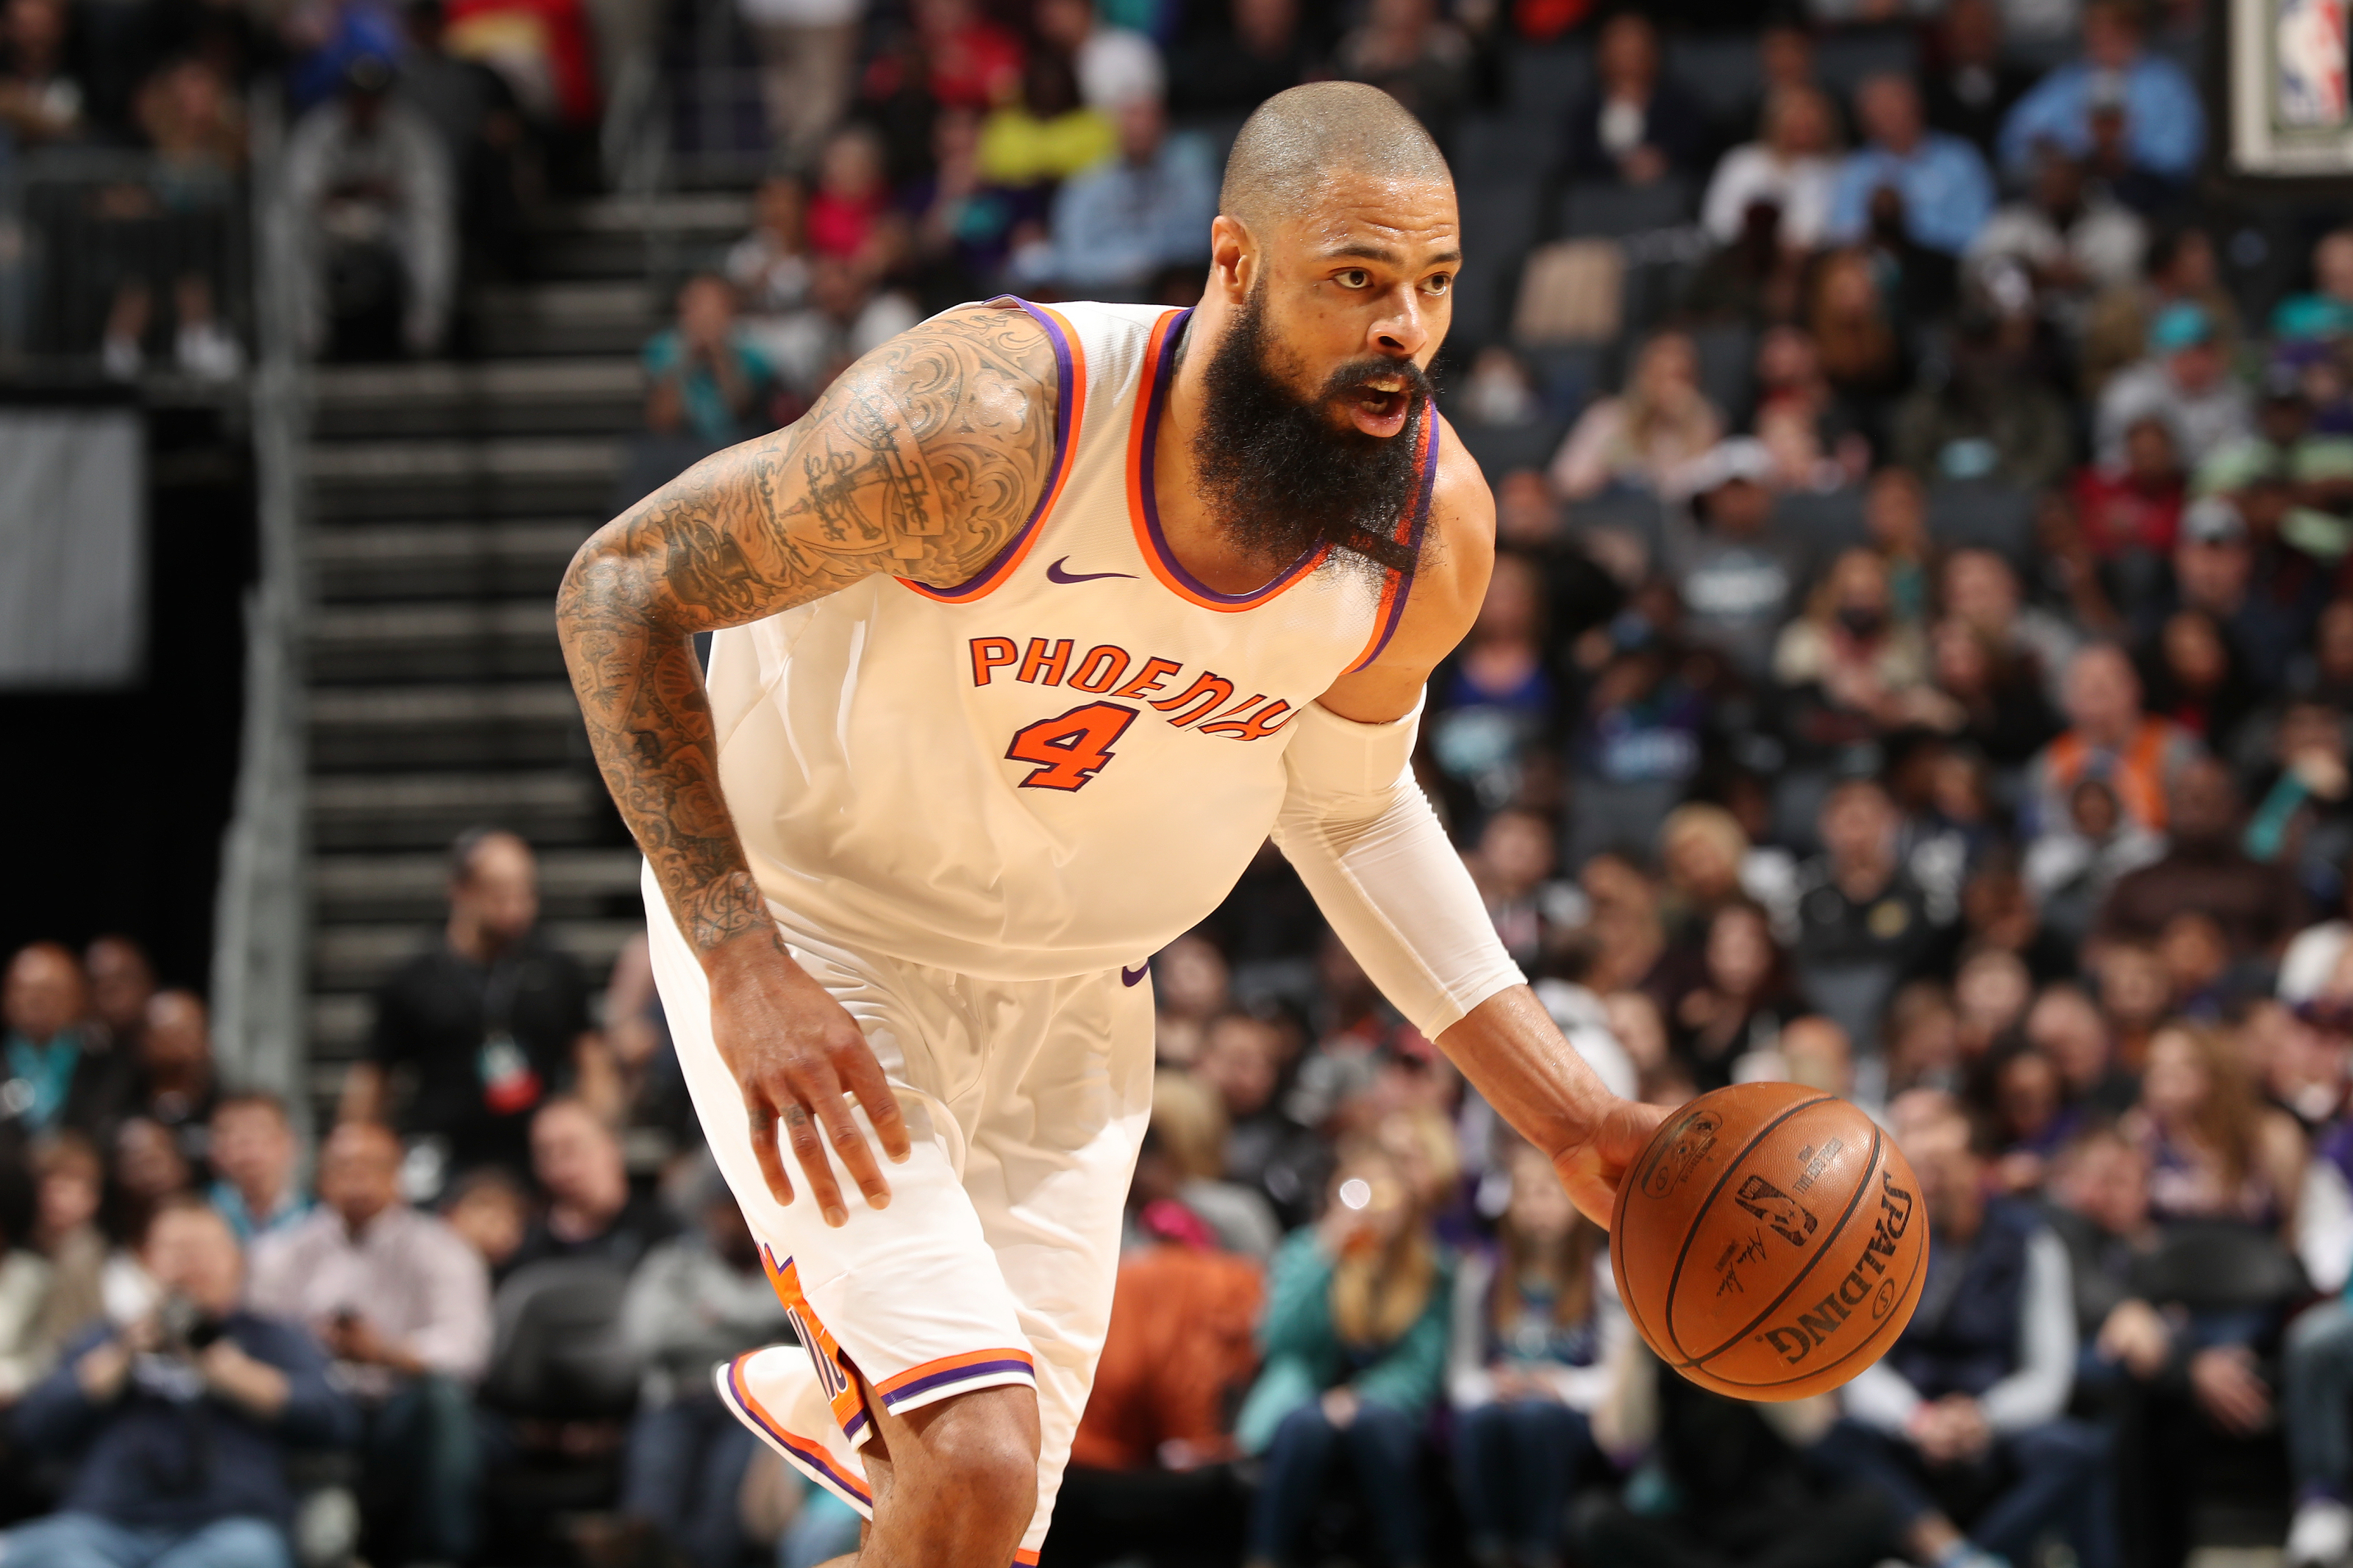 Reports: Tyson Chandler expected to sign with Lakers after Suns